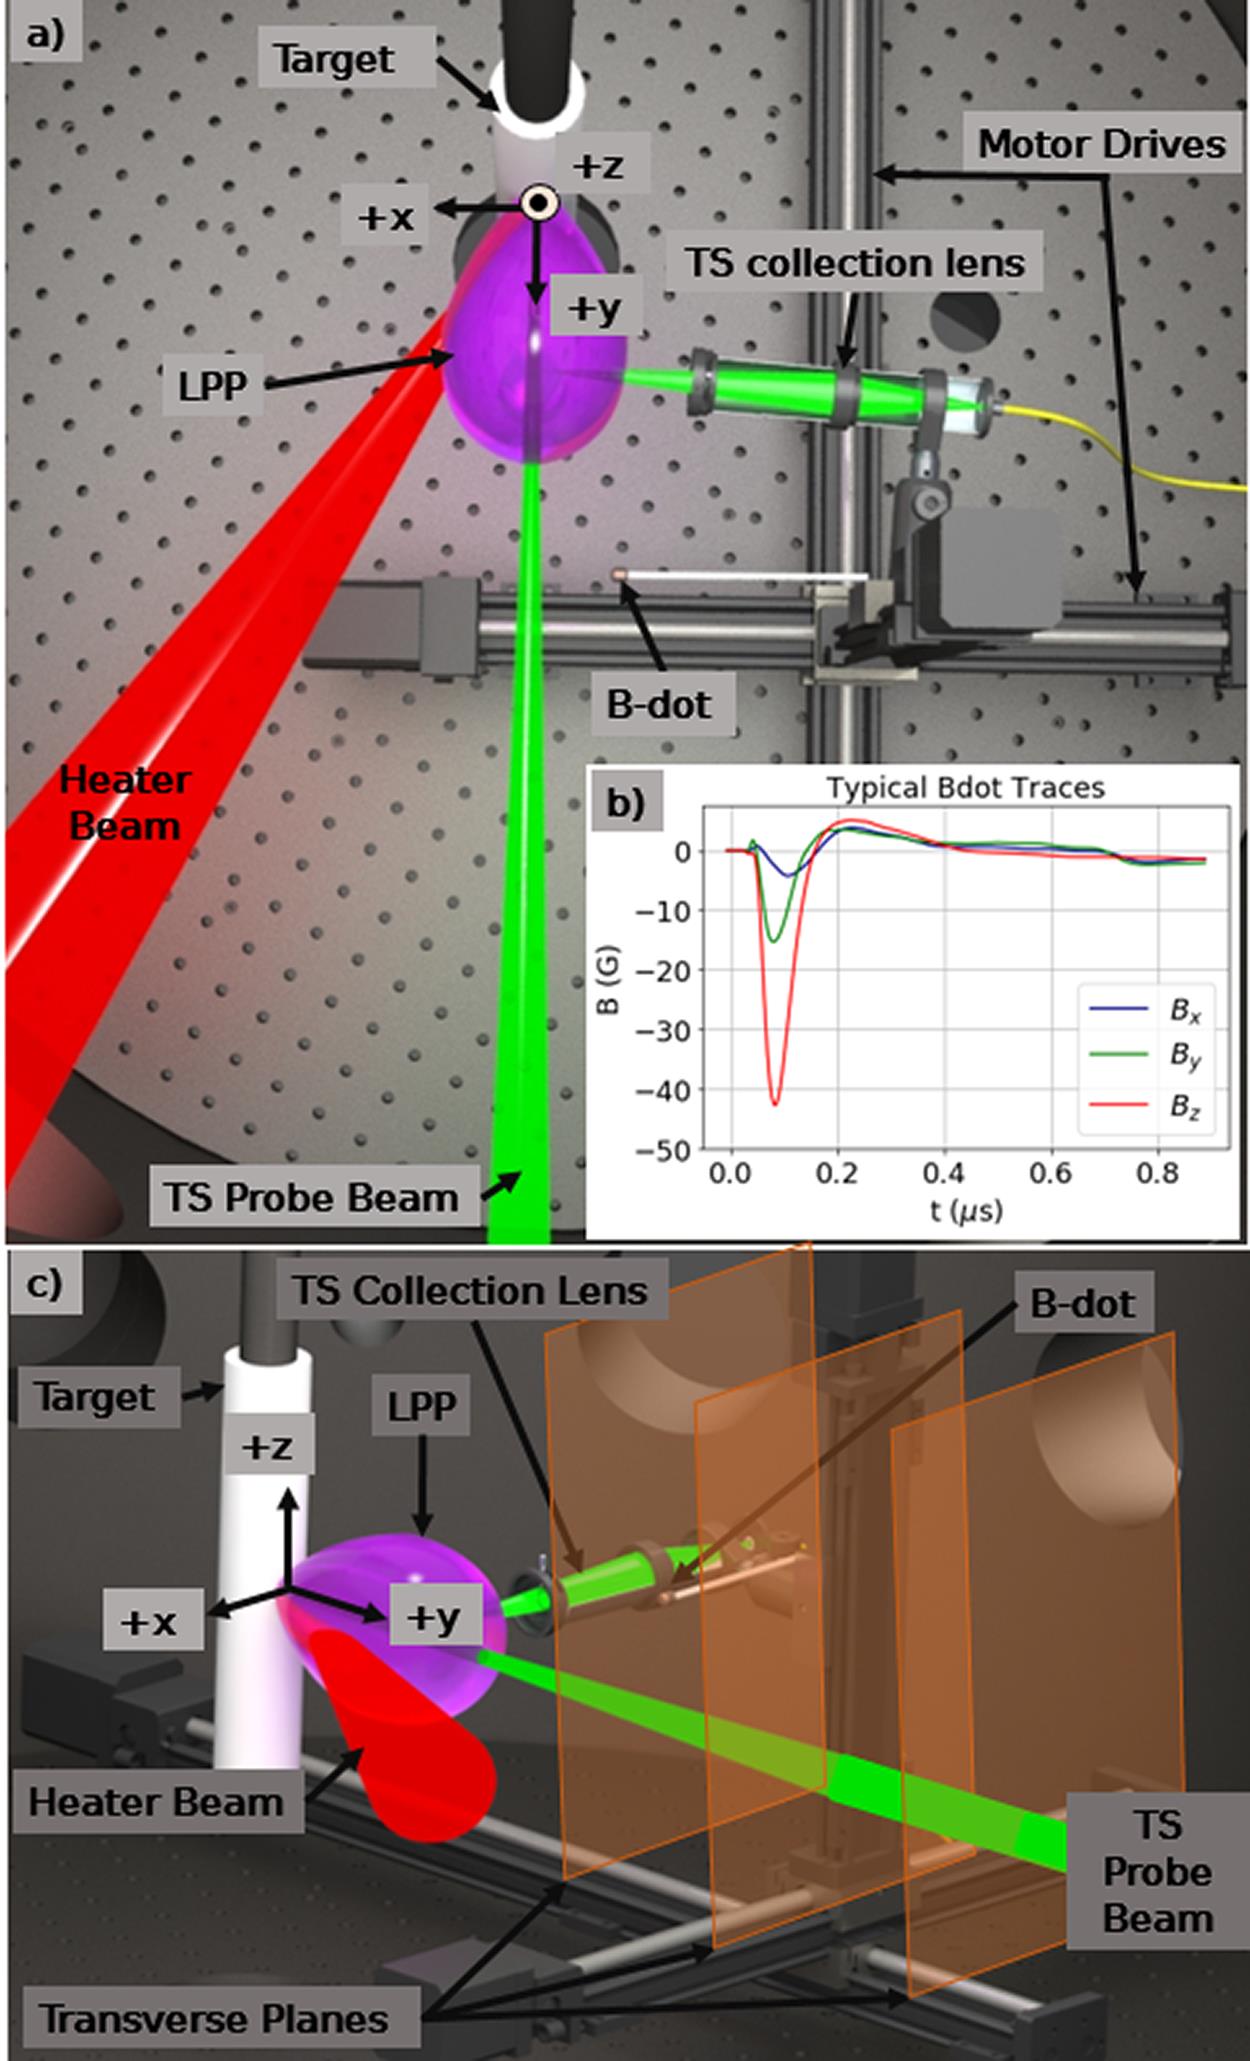 A rendering of the experimental setup. (a) Top view. The origin of the coordinate system is the laser spot on target, with the corresponding axis directions as depicted. (b) Typical B-dot probe traces for all three axes of the probe. (c) Side view. The translucent orange rectangles represent the planes in which magnetic field data were collected.